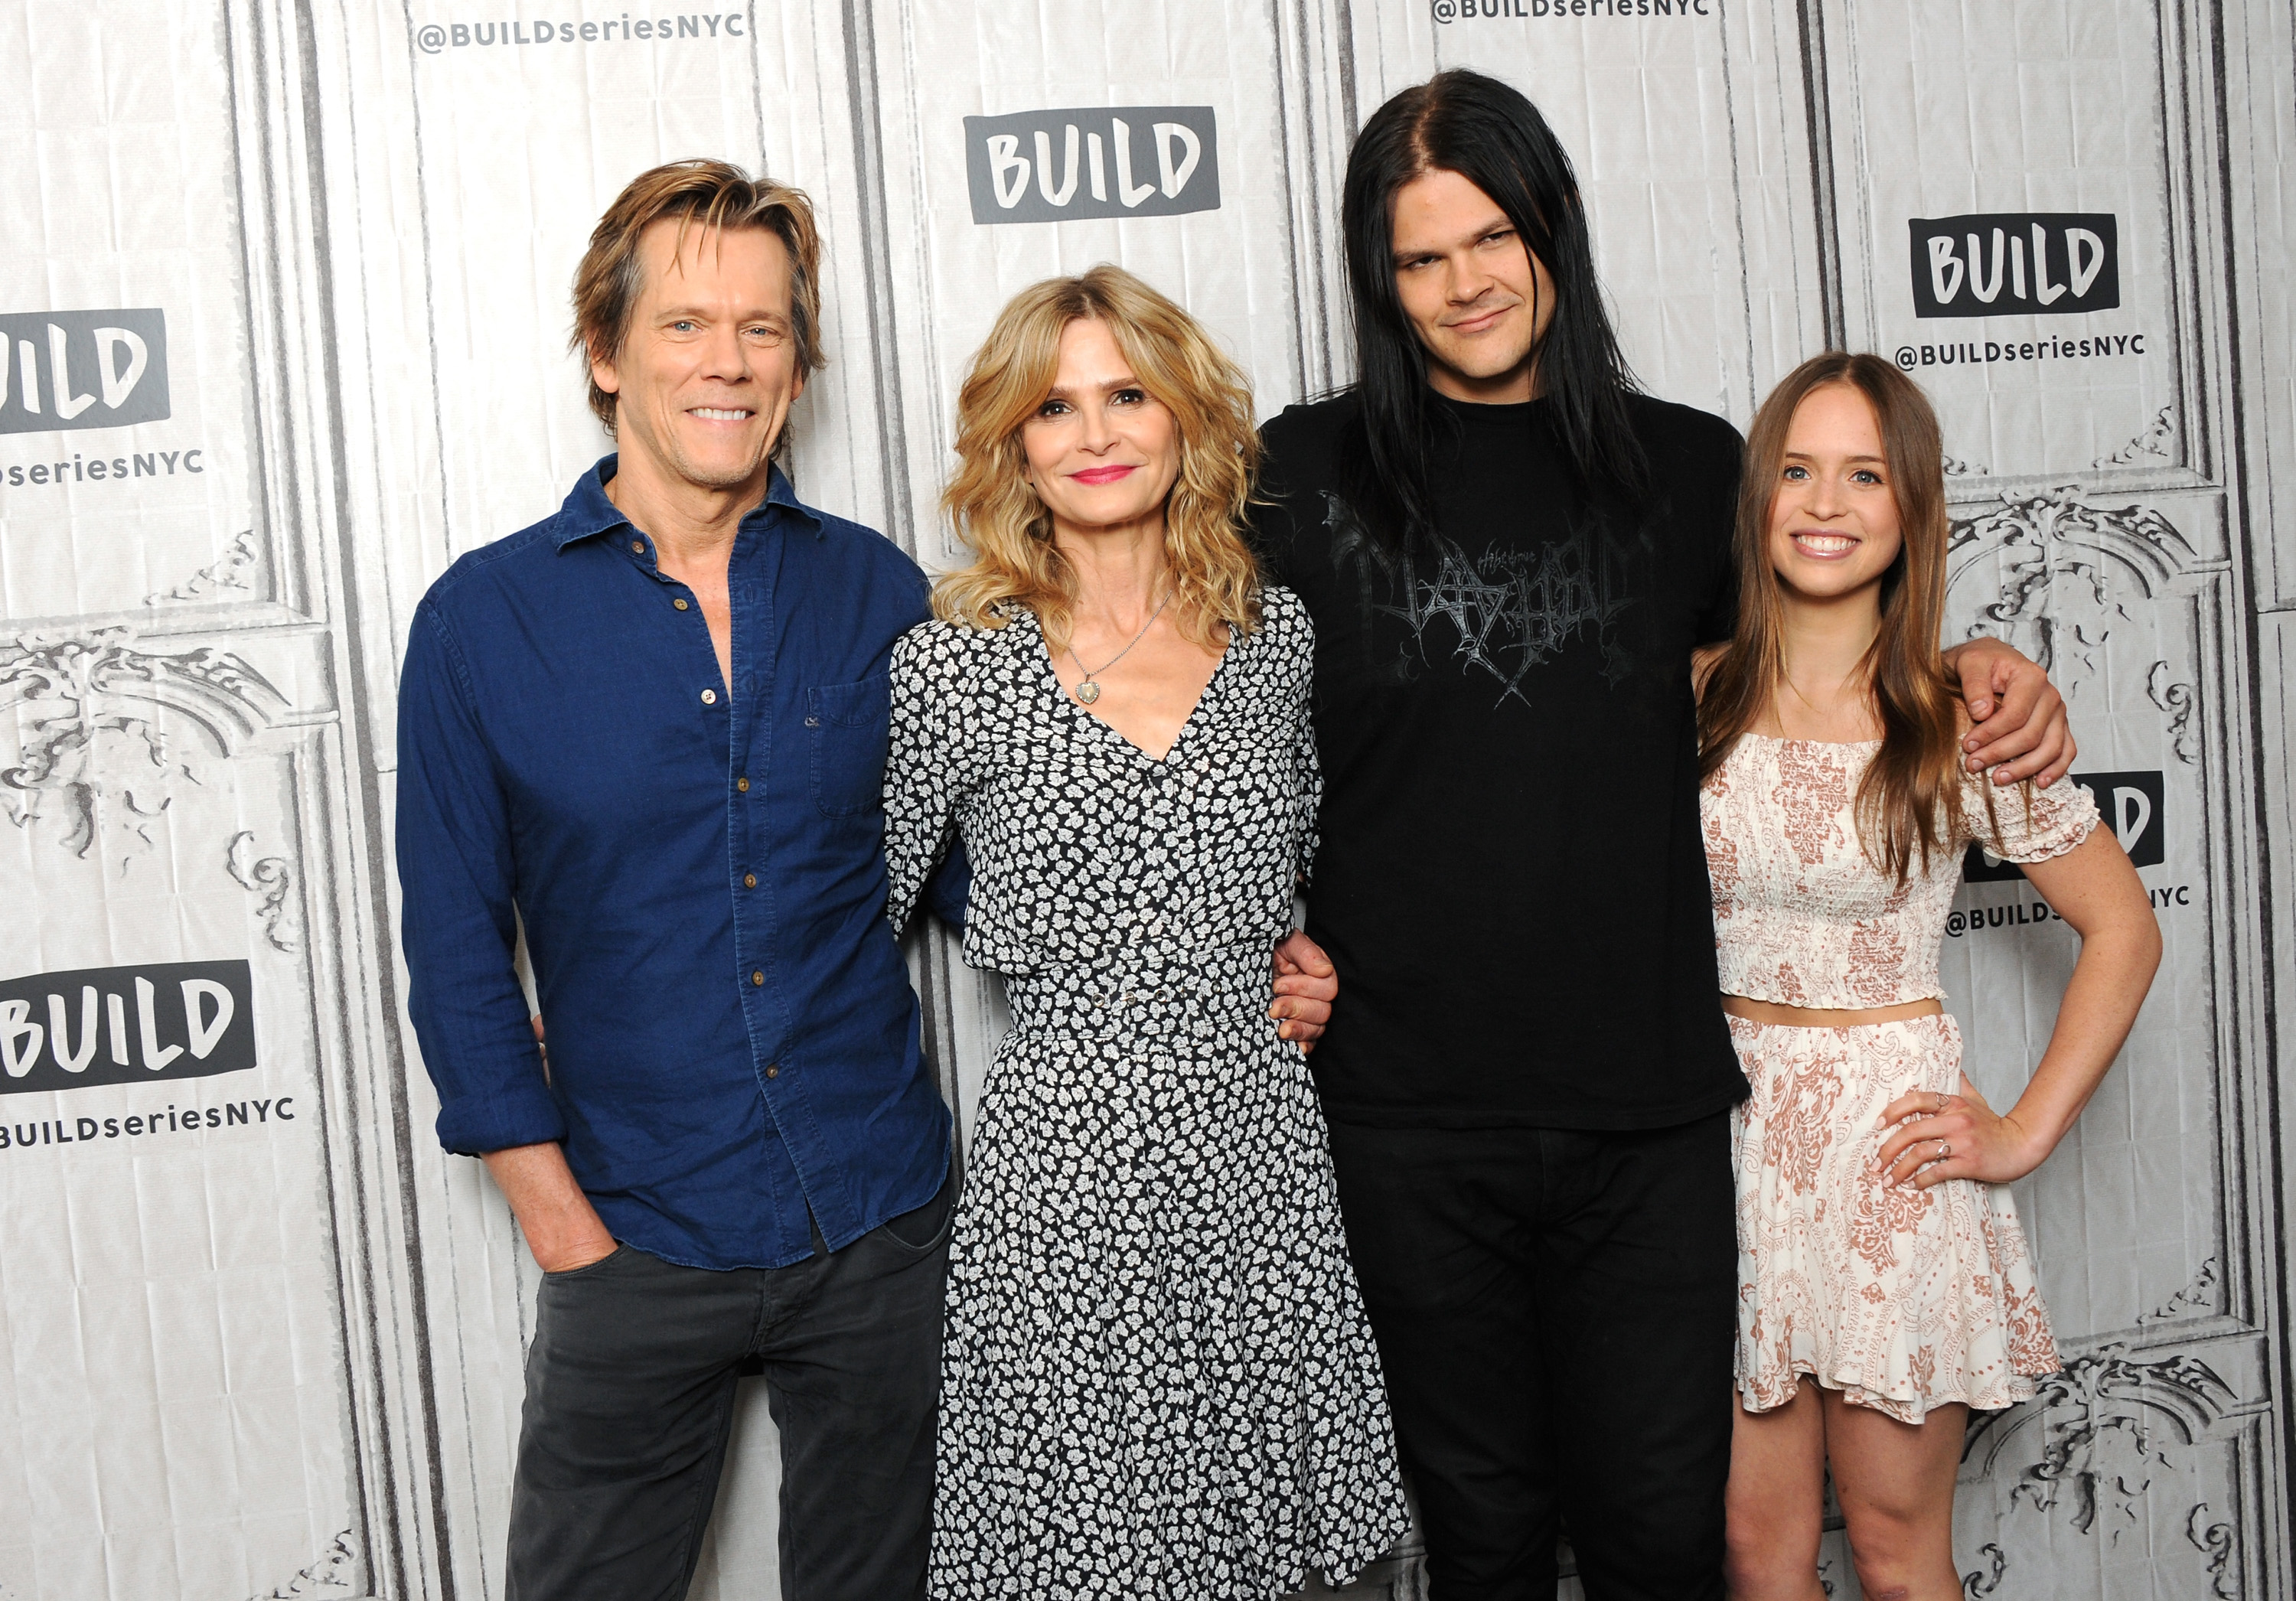 Kevin Bacon, Kyra Sedgwick, Travis Bacon and Ryann Shane at the preview of the new Lifetime film 'Story of a Girl' in 2017 in New York City. | Source: Getty Images